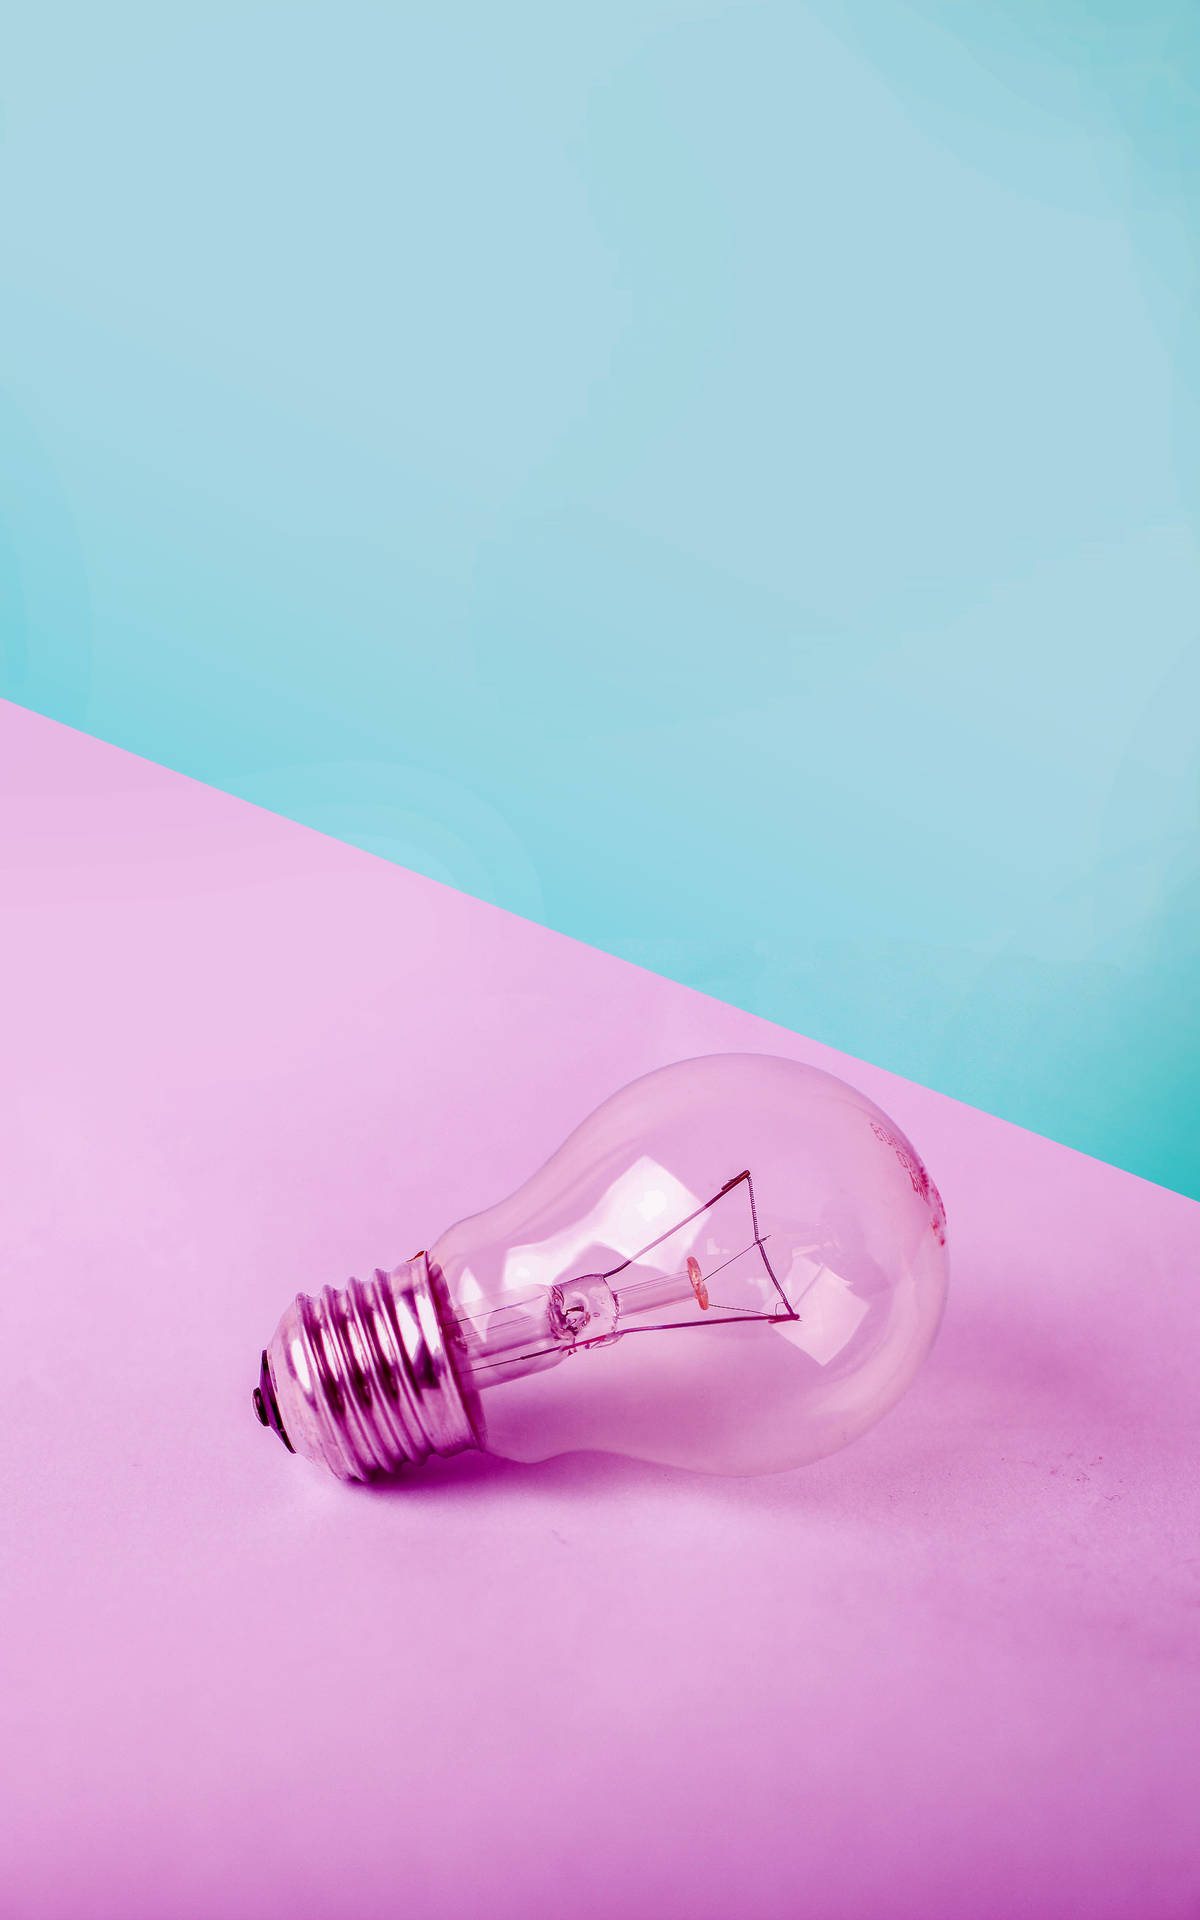 Minimalist Bulb In Pastel Blue And Violet